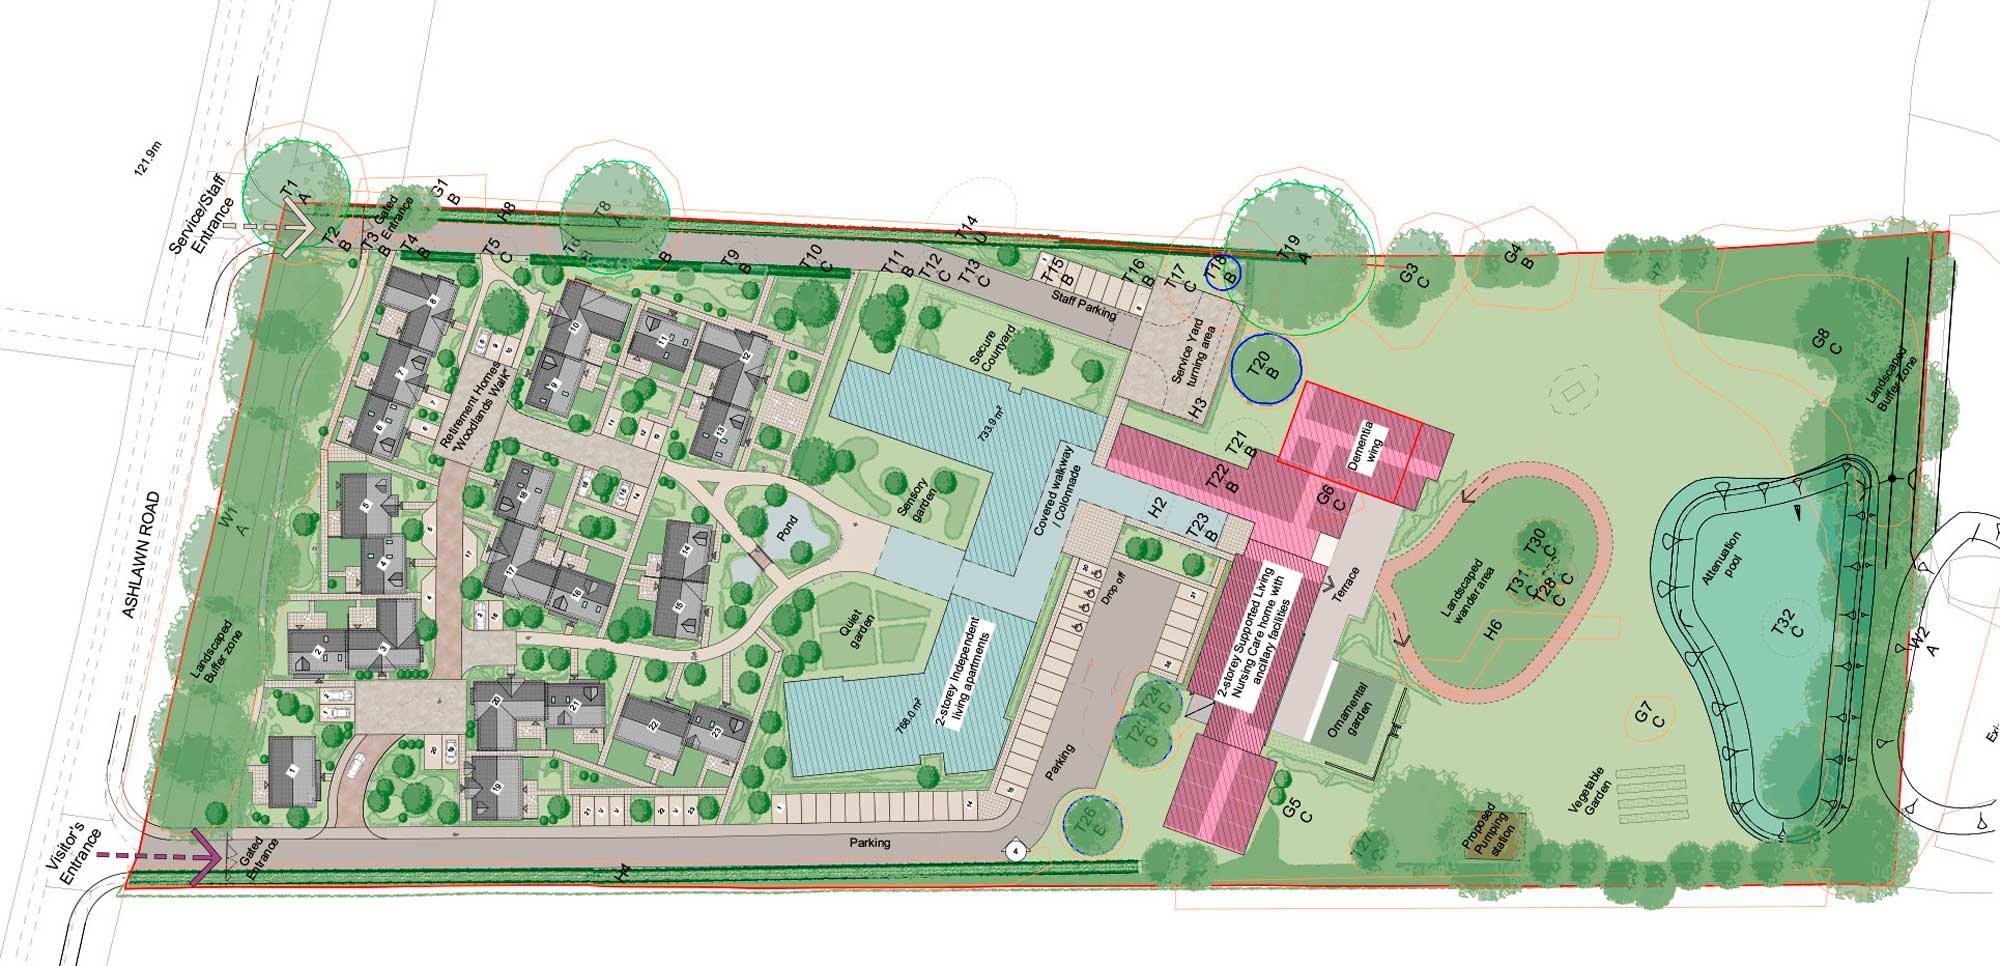 Technical illustration showing the plan and details for the site